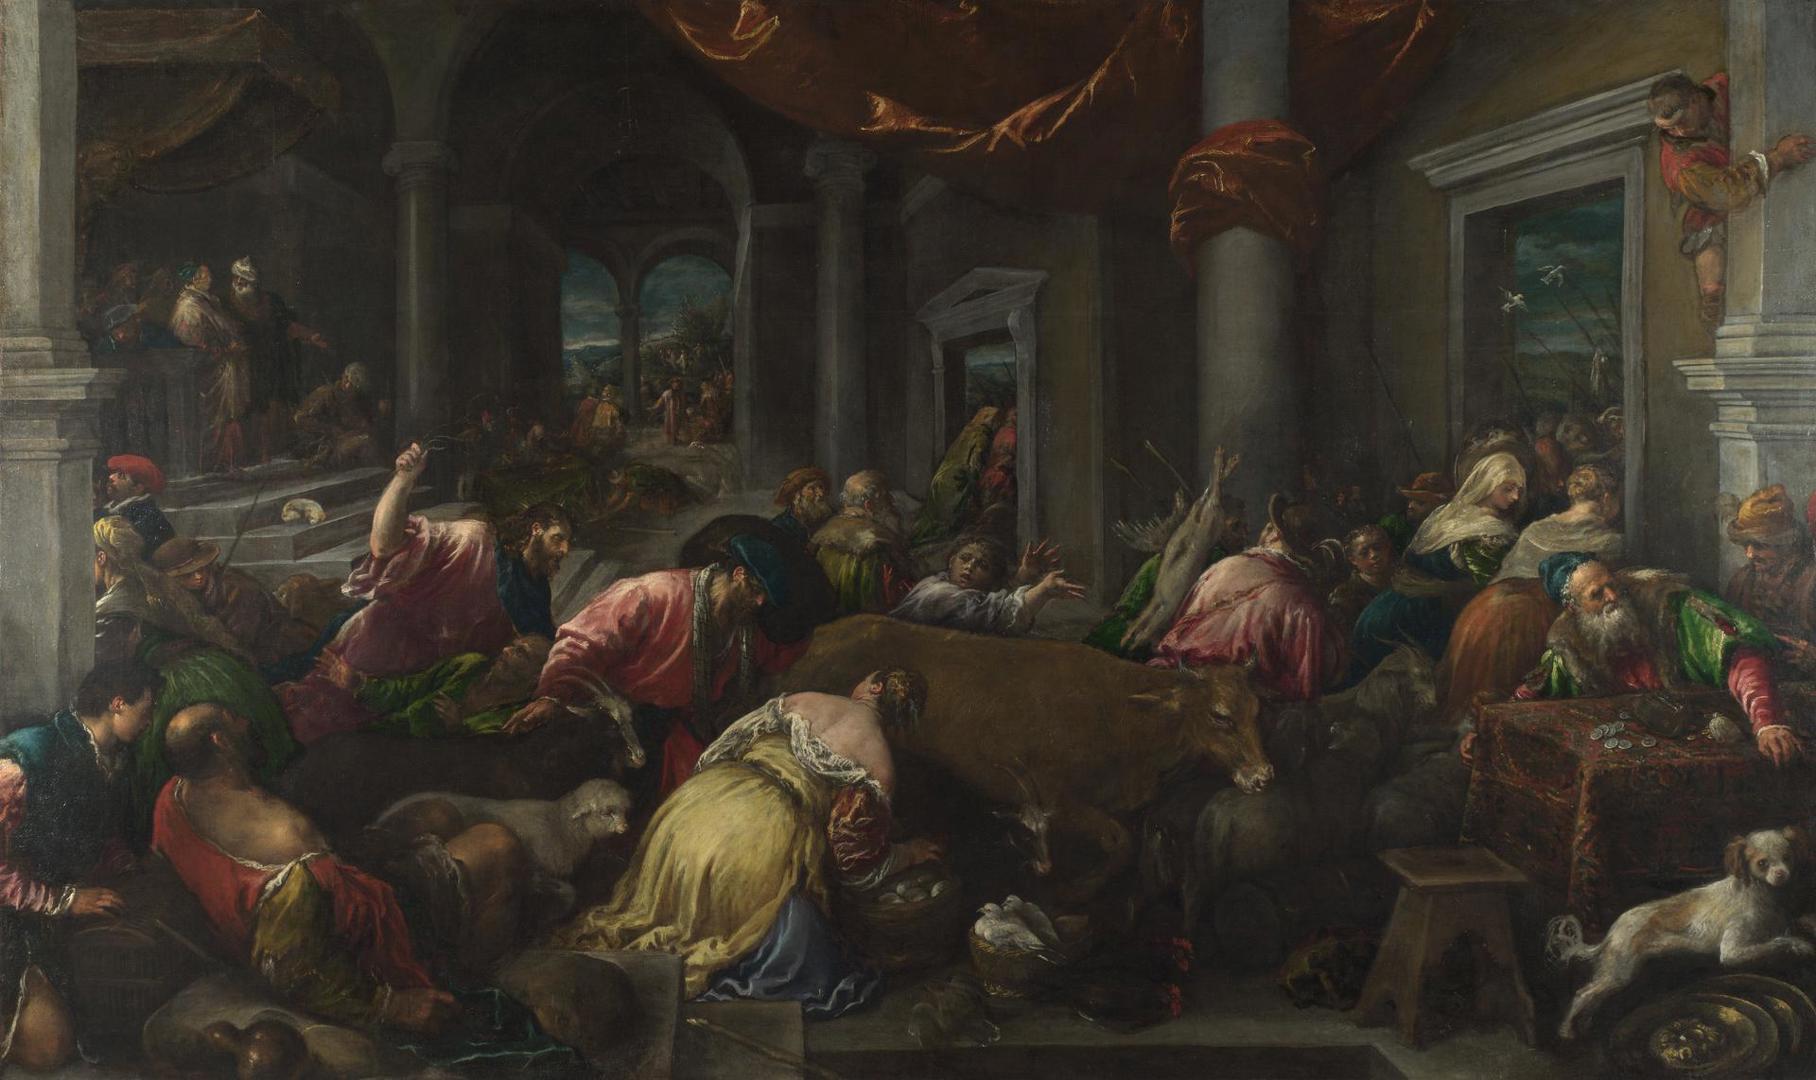 The Purification of the Temple by Jacopo Bassano and workshop